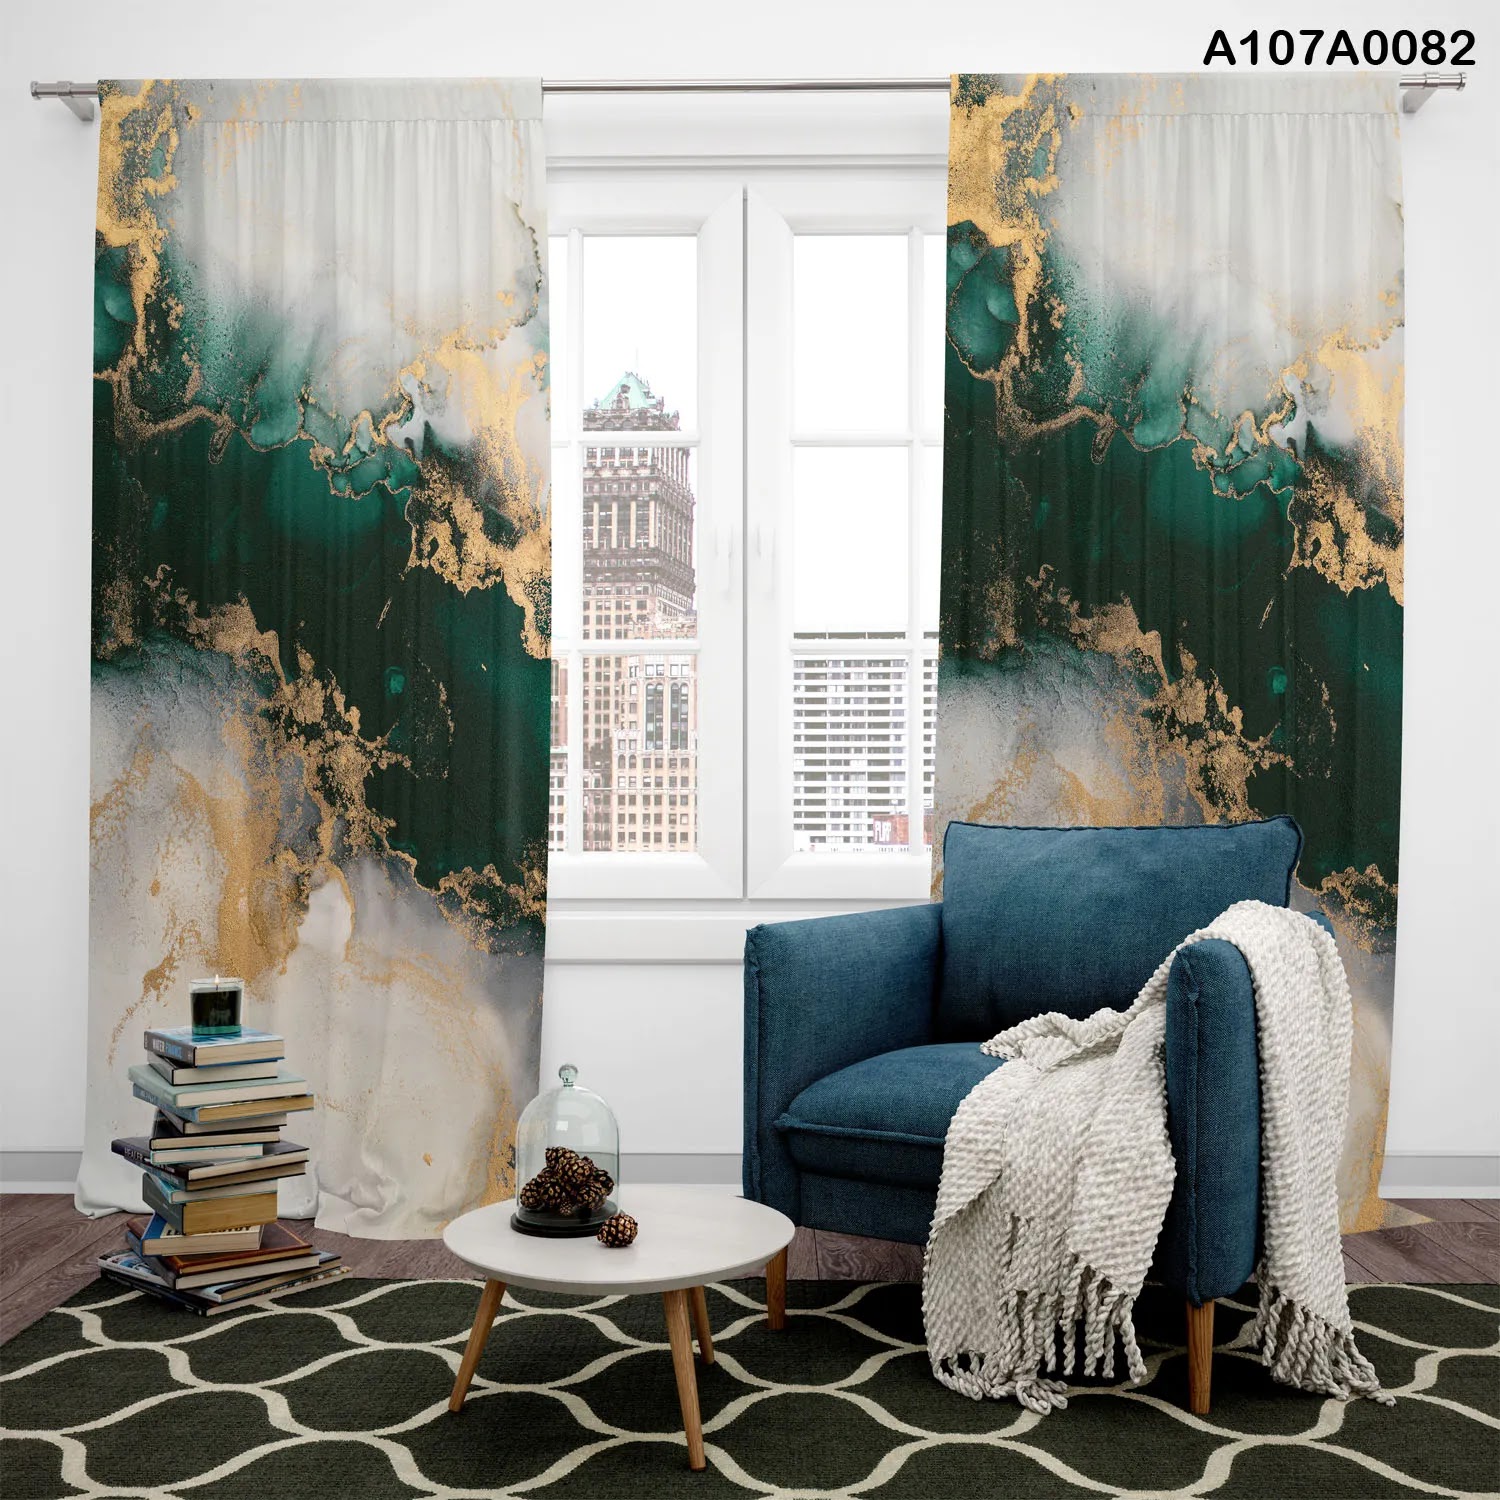 Curtains with color combination of dark green, white and gold